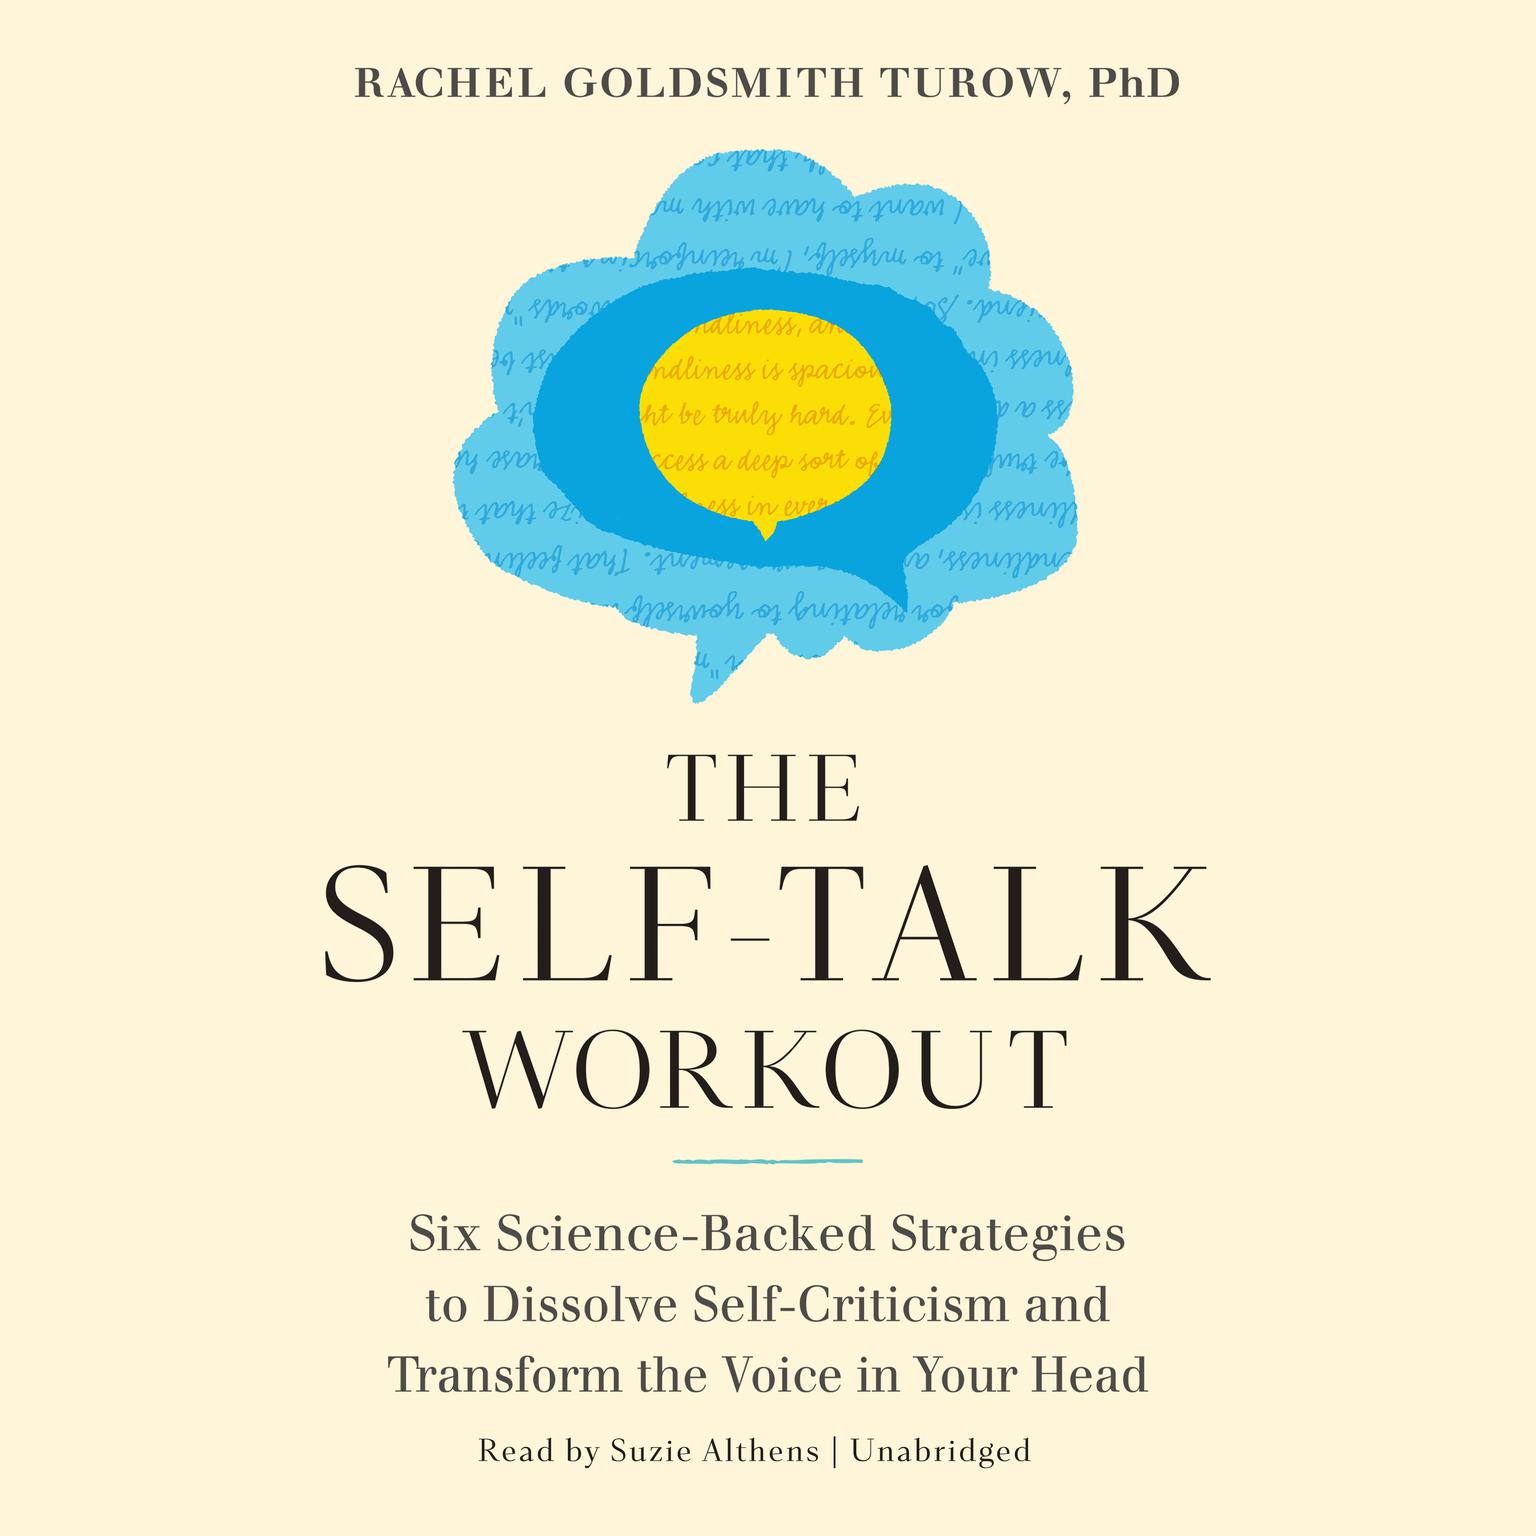 The Self-Talk Workout: Six Science-Backed Strategies to Dissolve Self-Criticism and Transform the Voice in Your Head Audiobook, by Rachel Goldsmith Turow